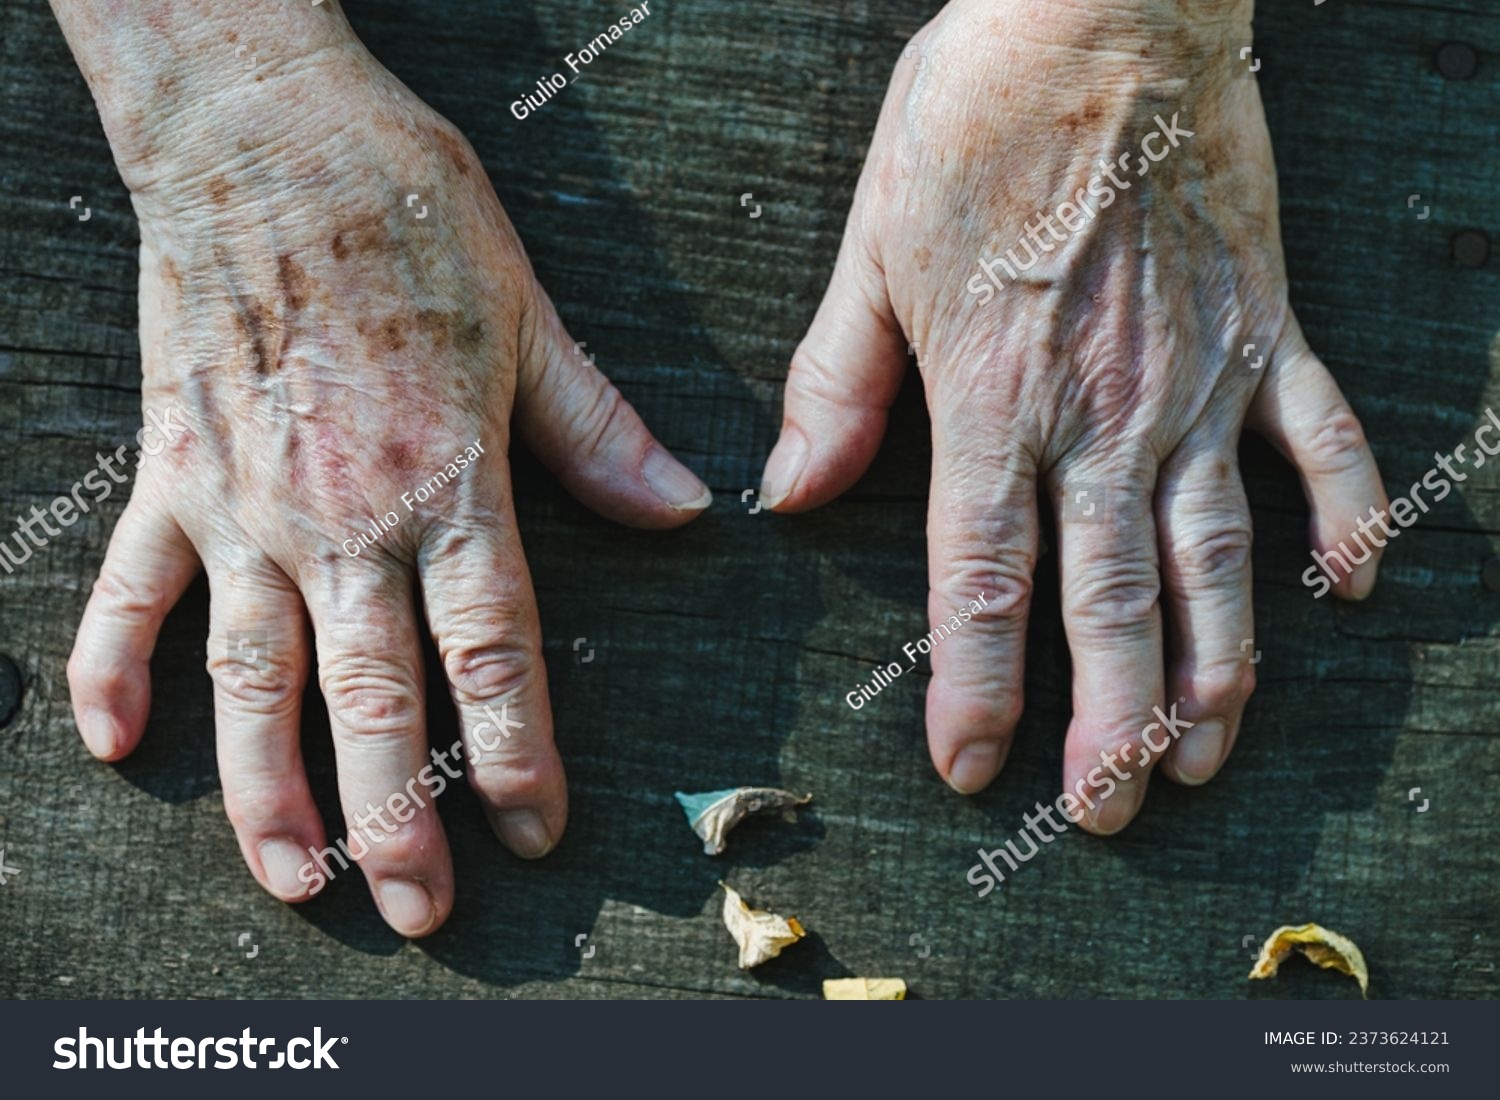 Elderly hands, showcasing a life's journey through their blemishes and creases, rest in a calming forest environment, contrasting with the surroundings #2373624121